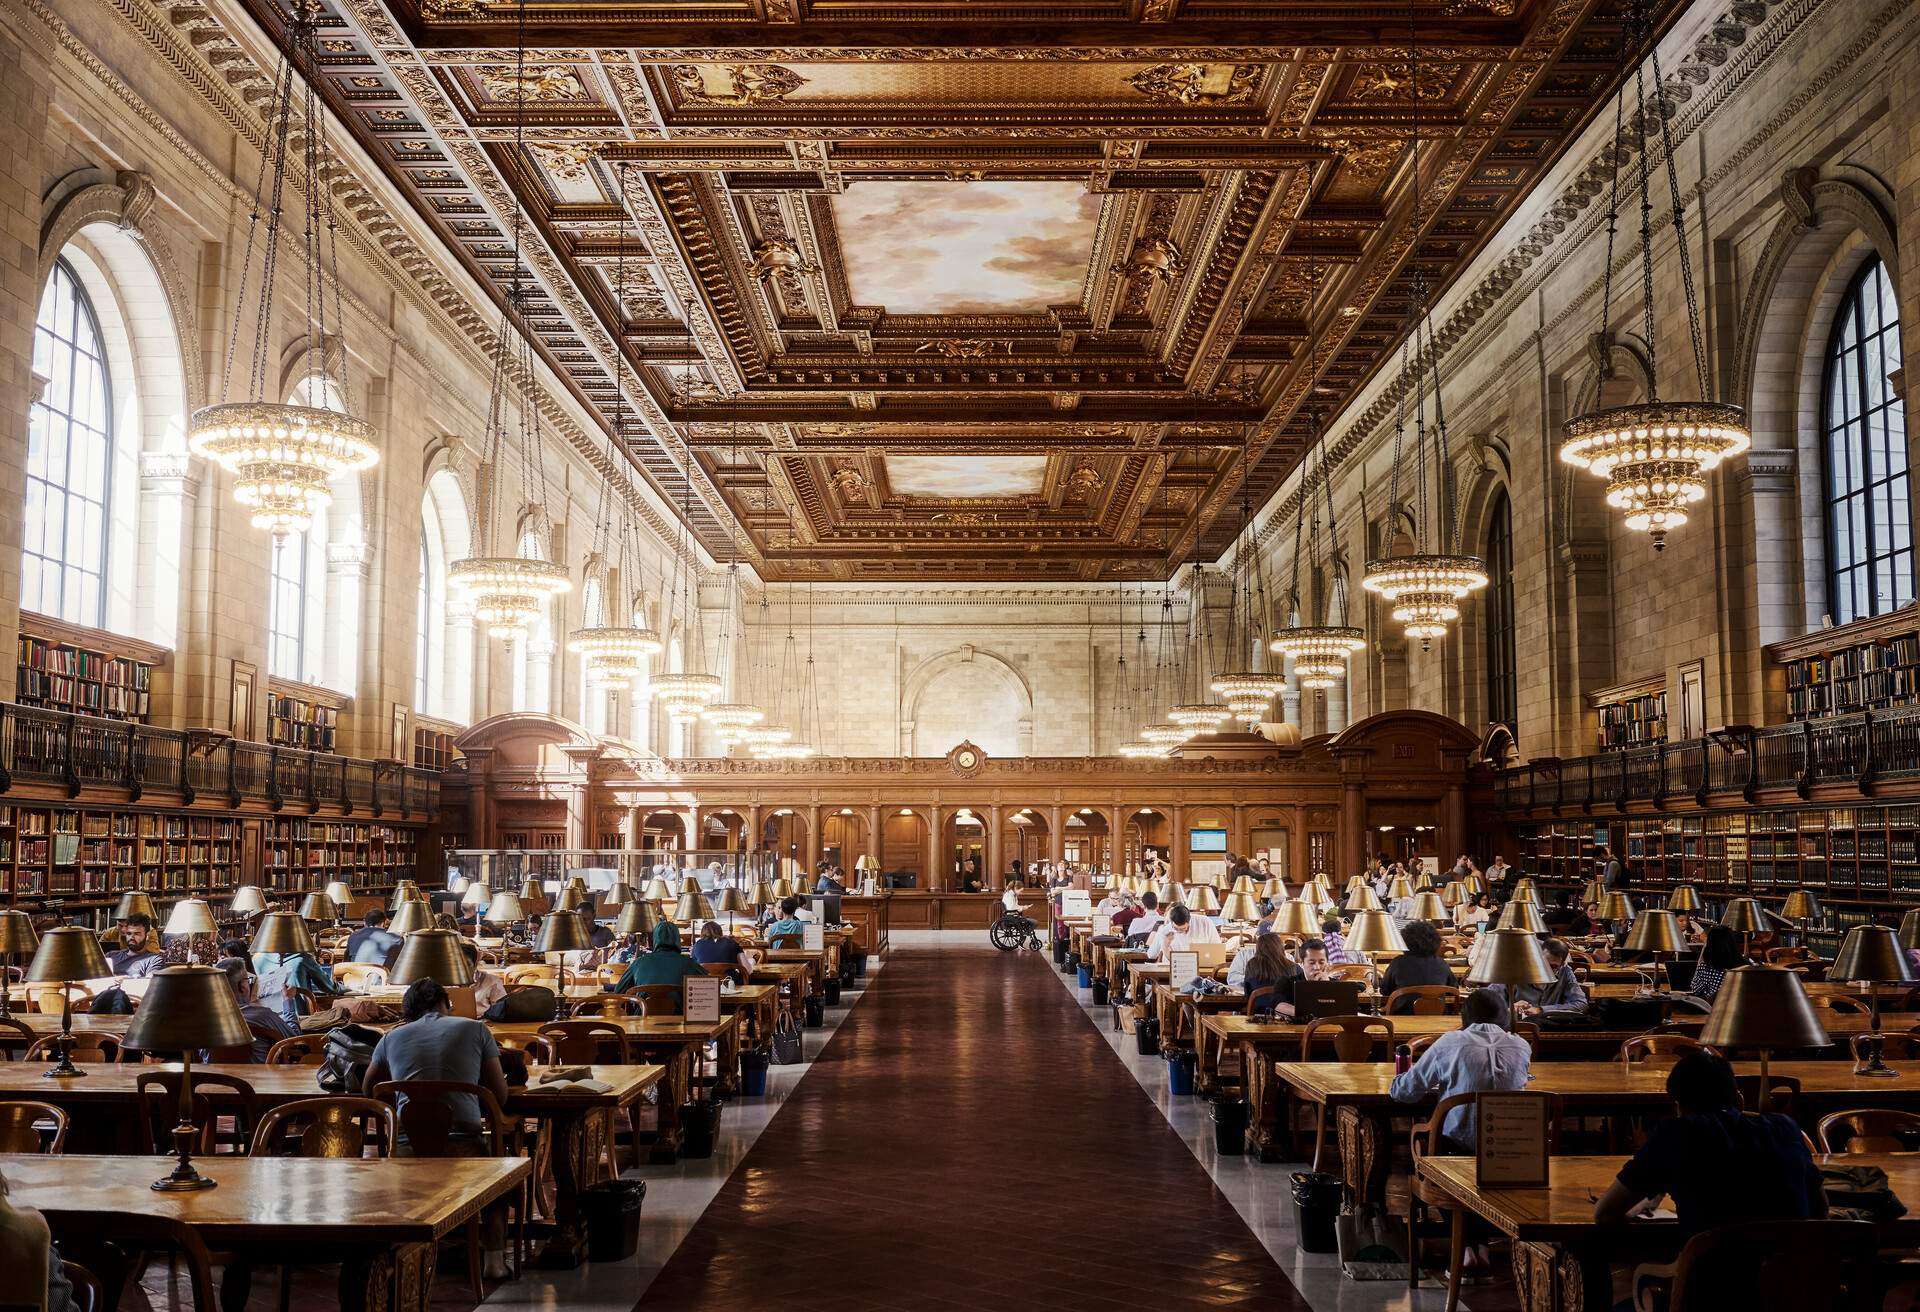 Interior of a library with intricately carved ceilings, hanging chandeliers, bookshelves and rows of tables with people studying.